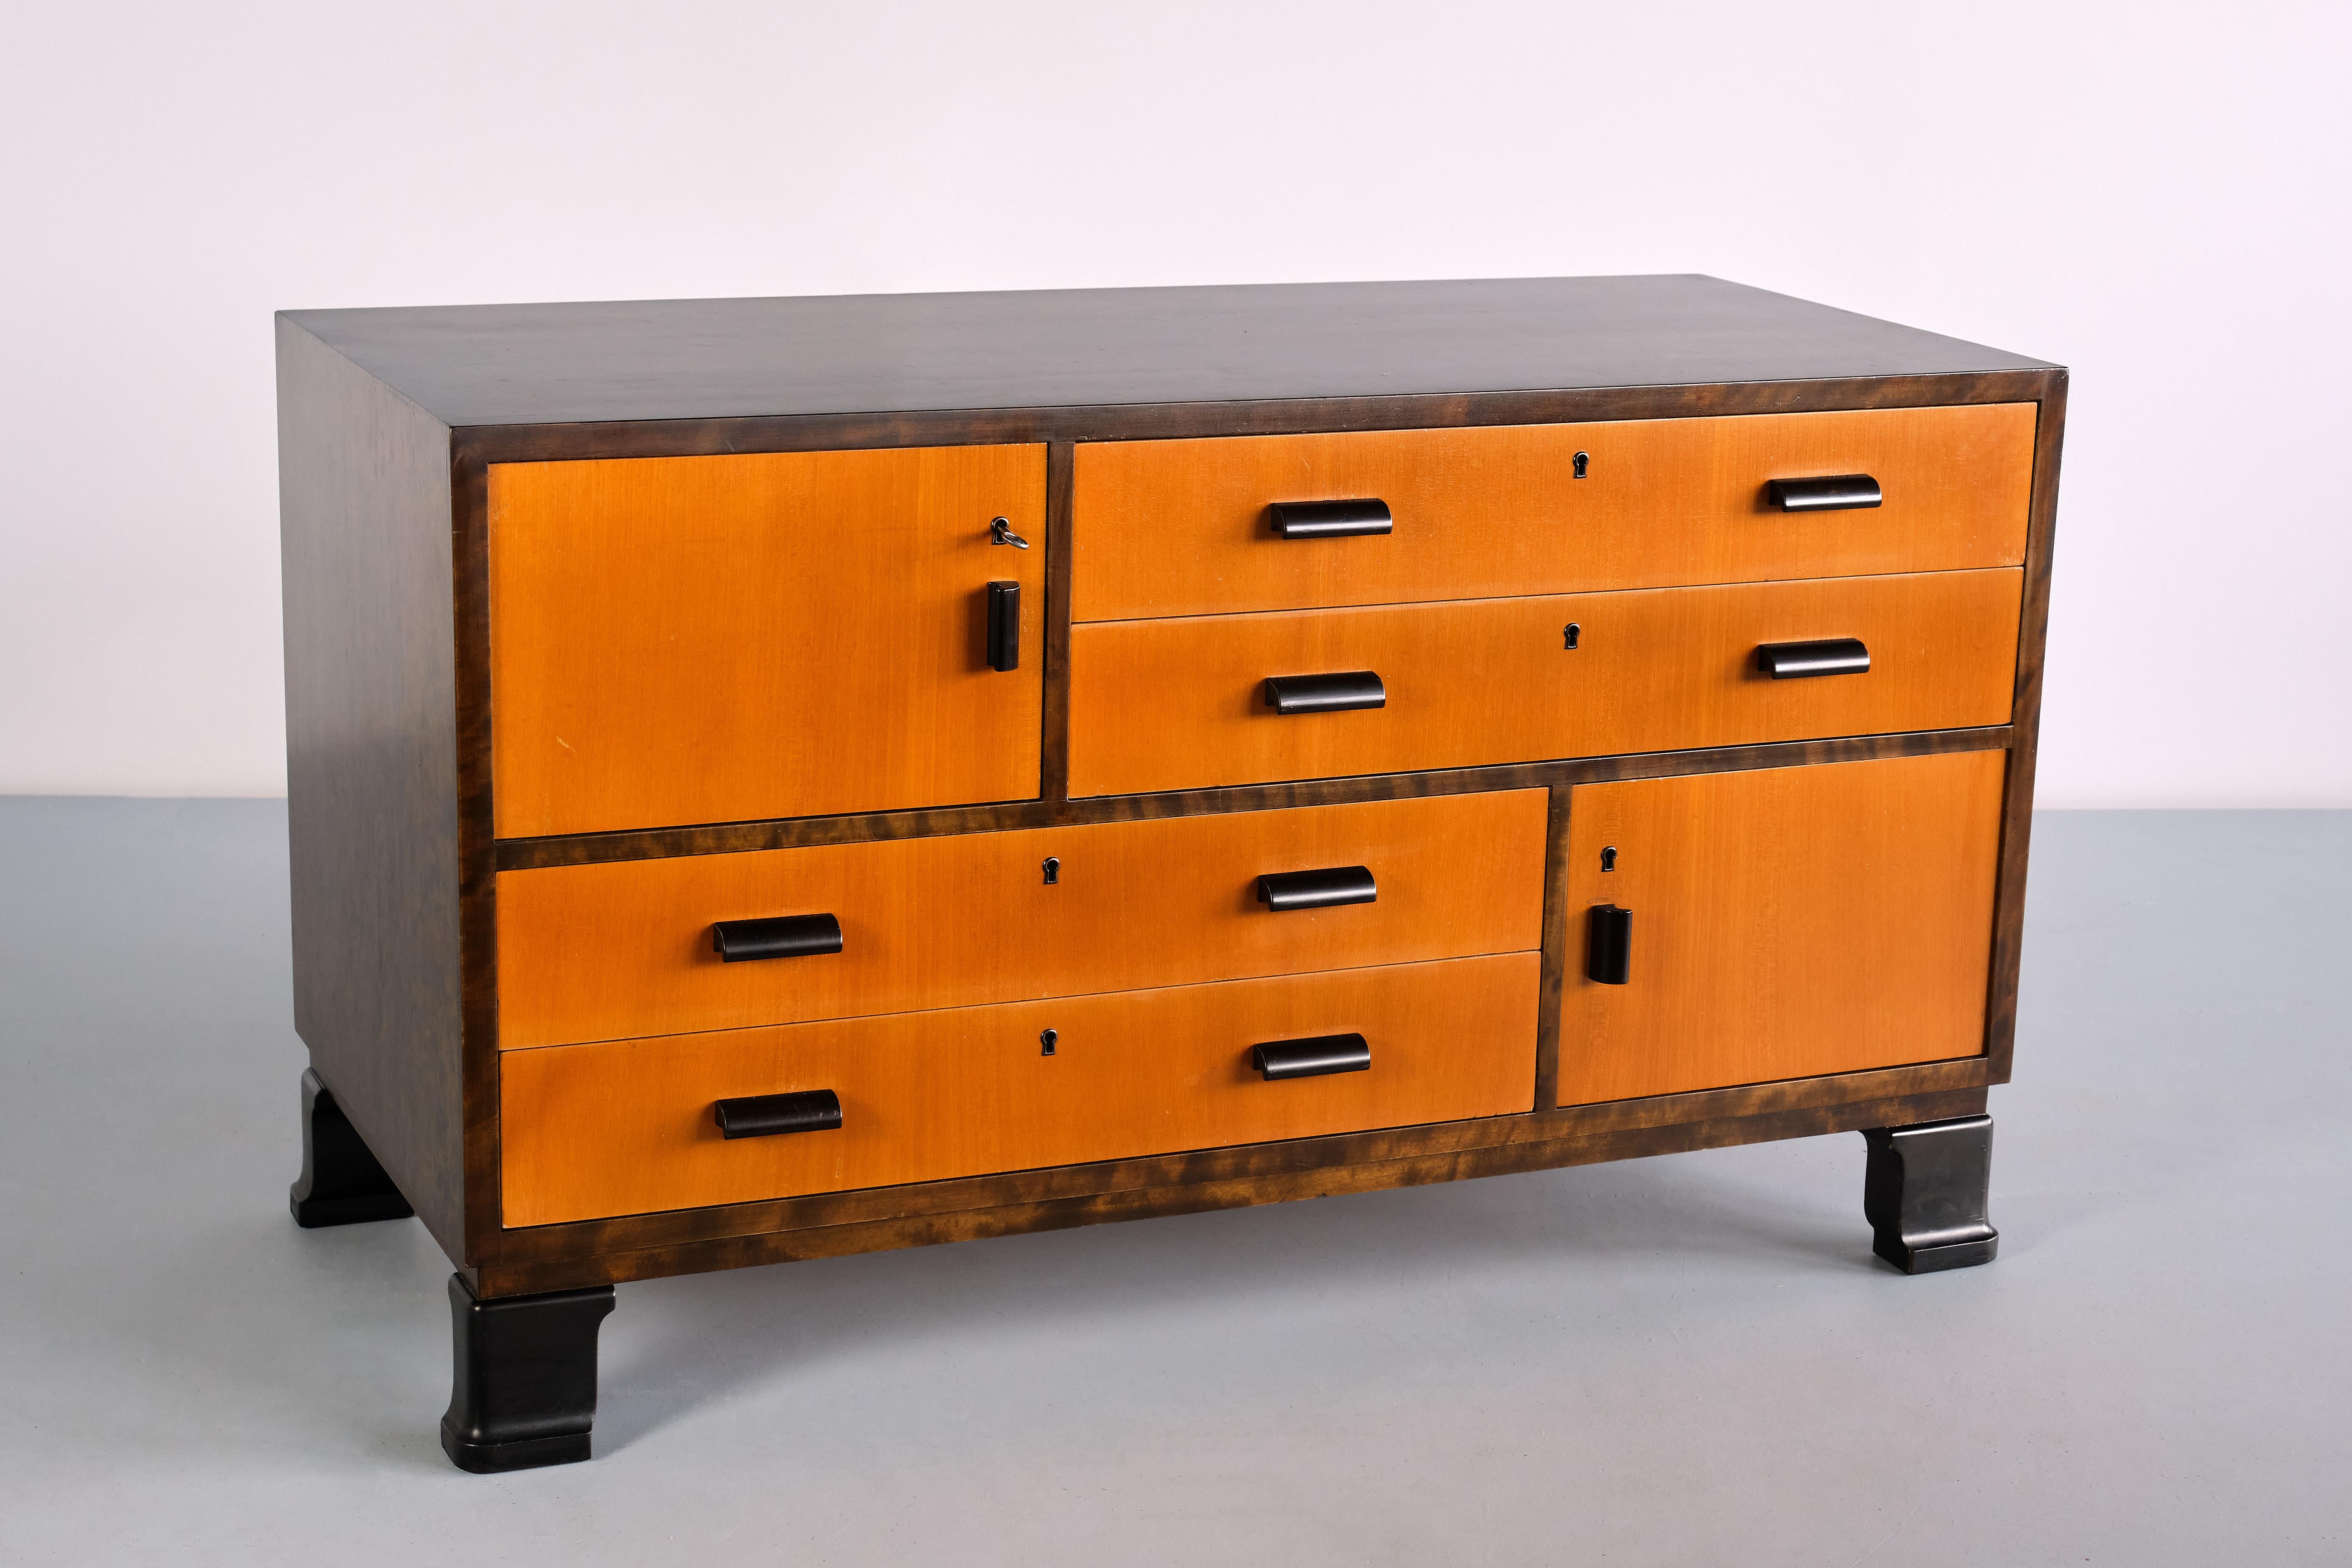 Swedish Pair of Axel Larsson Sideboards in Elm and Birch, SMF Bodafors, Sweden, 1940s For Sale